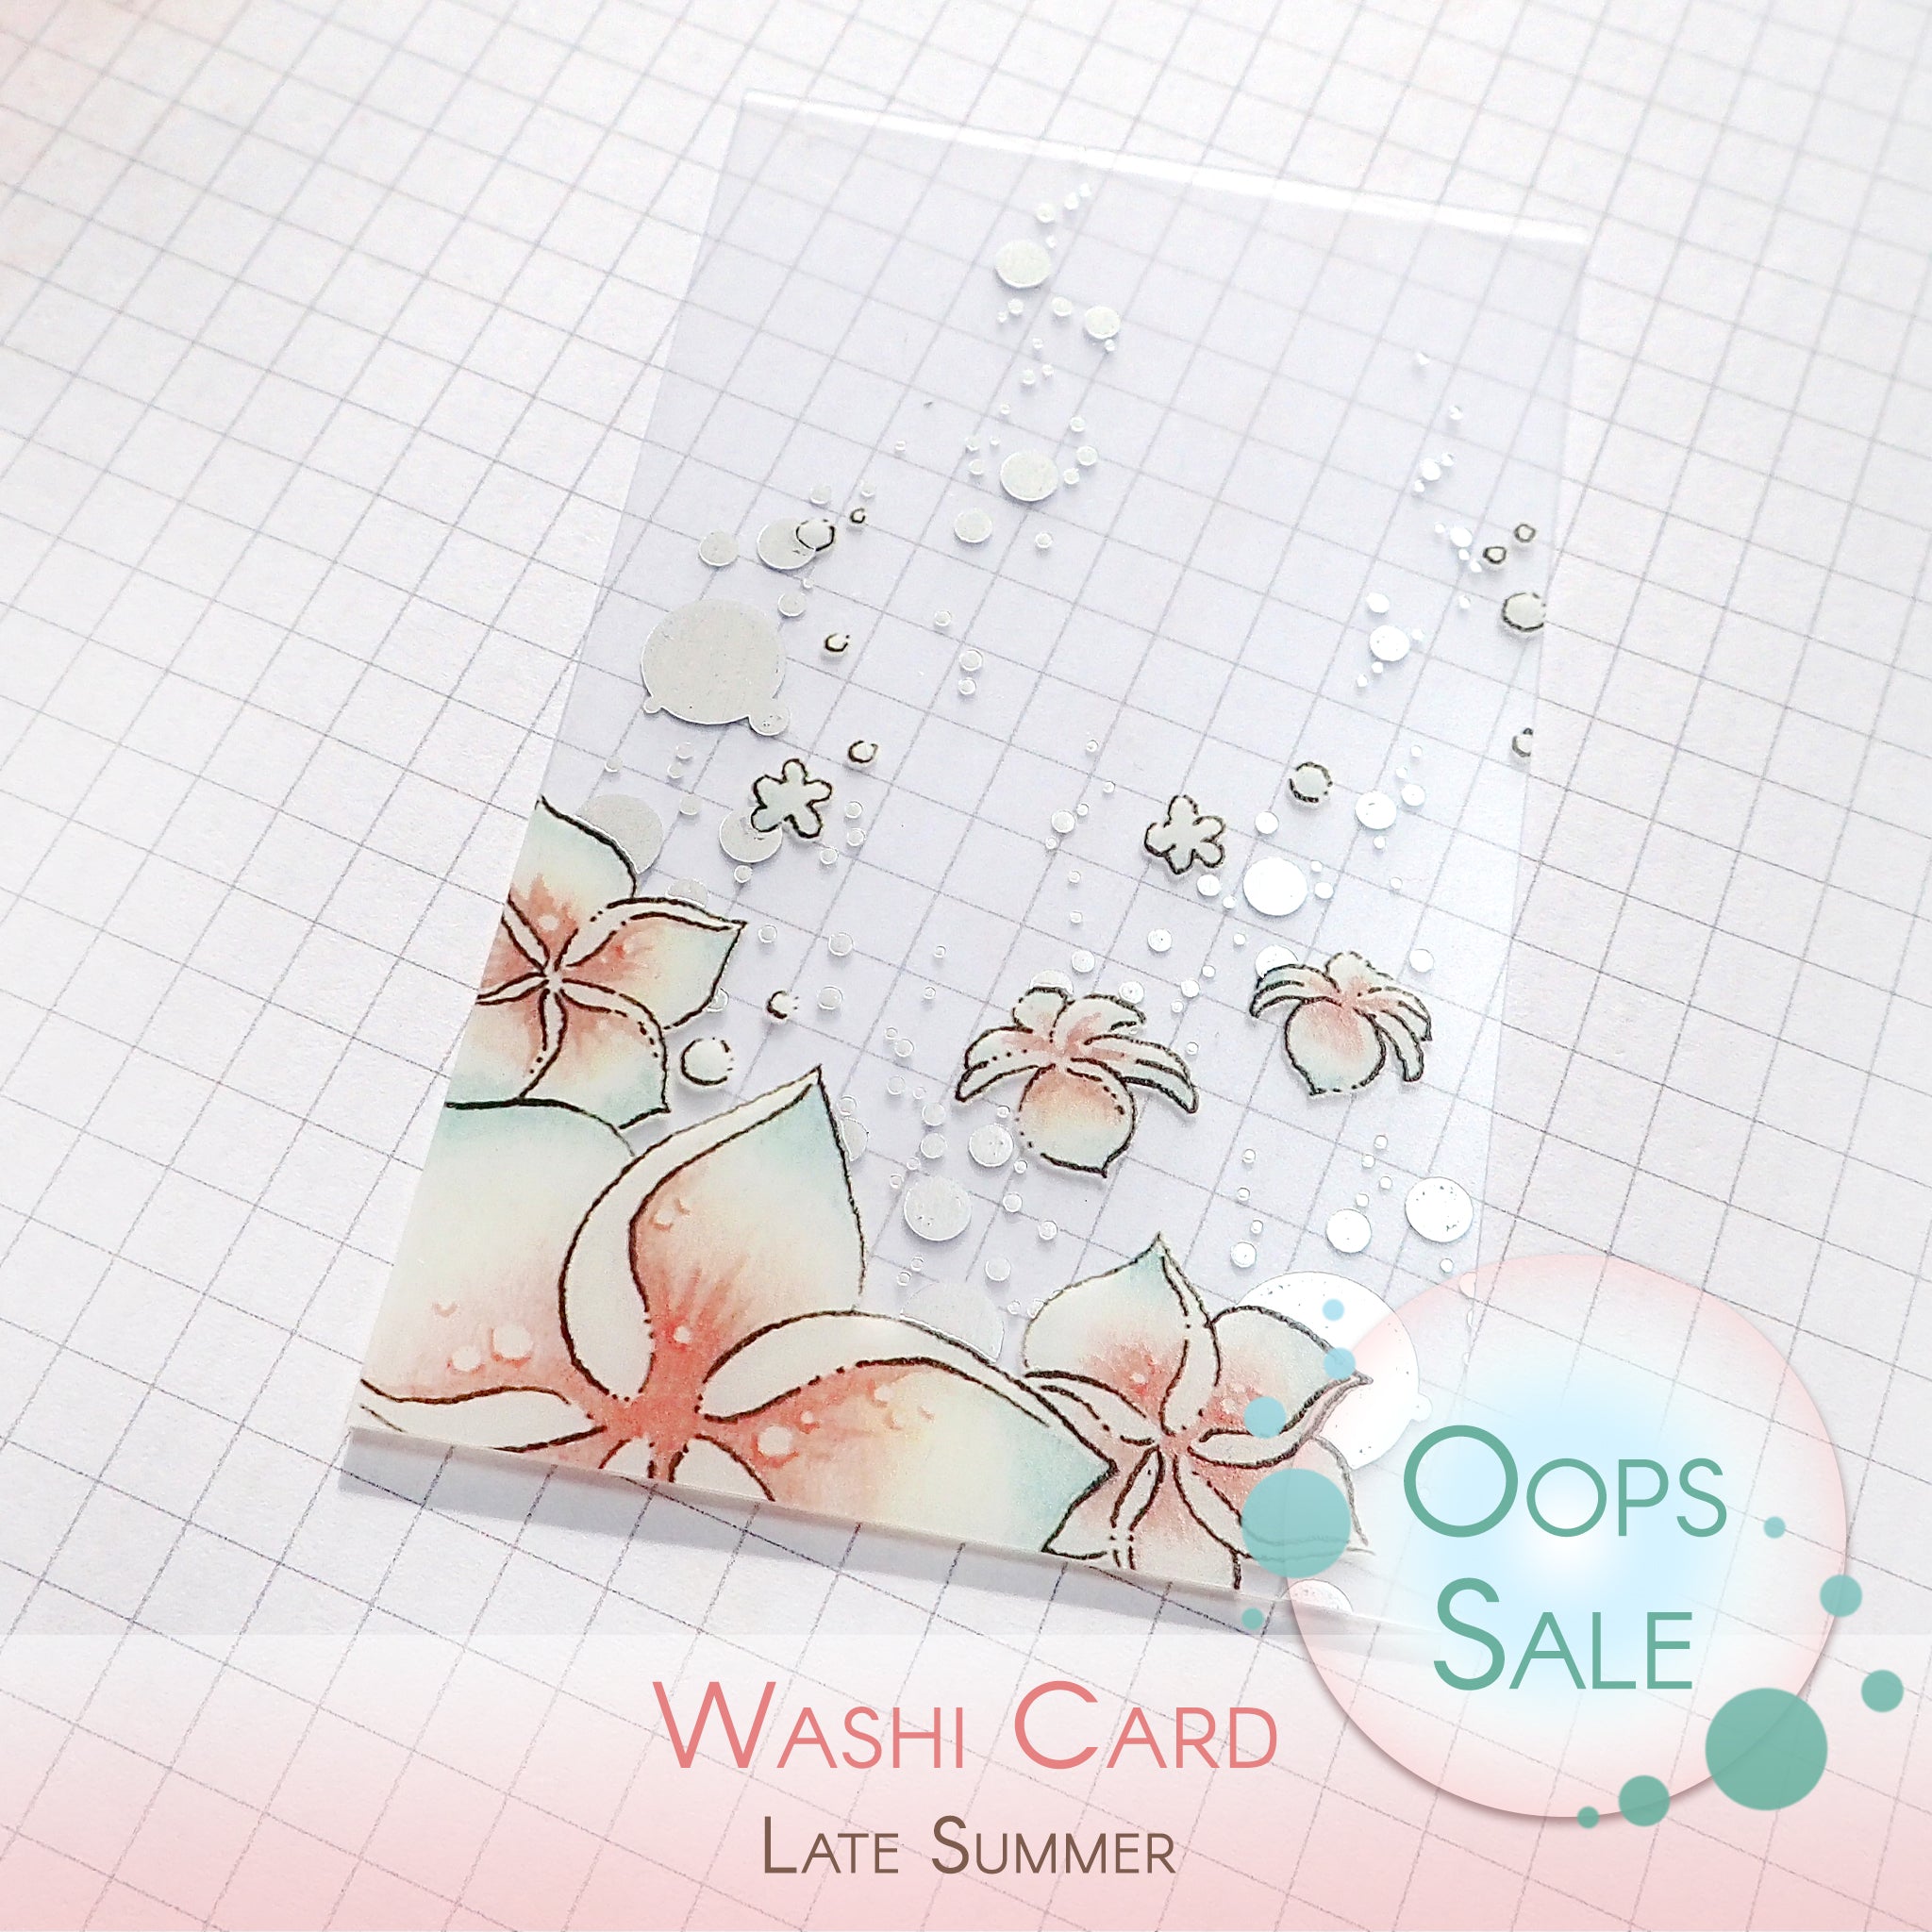 Washi tape card with summer flowers details